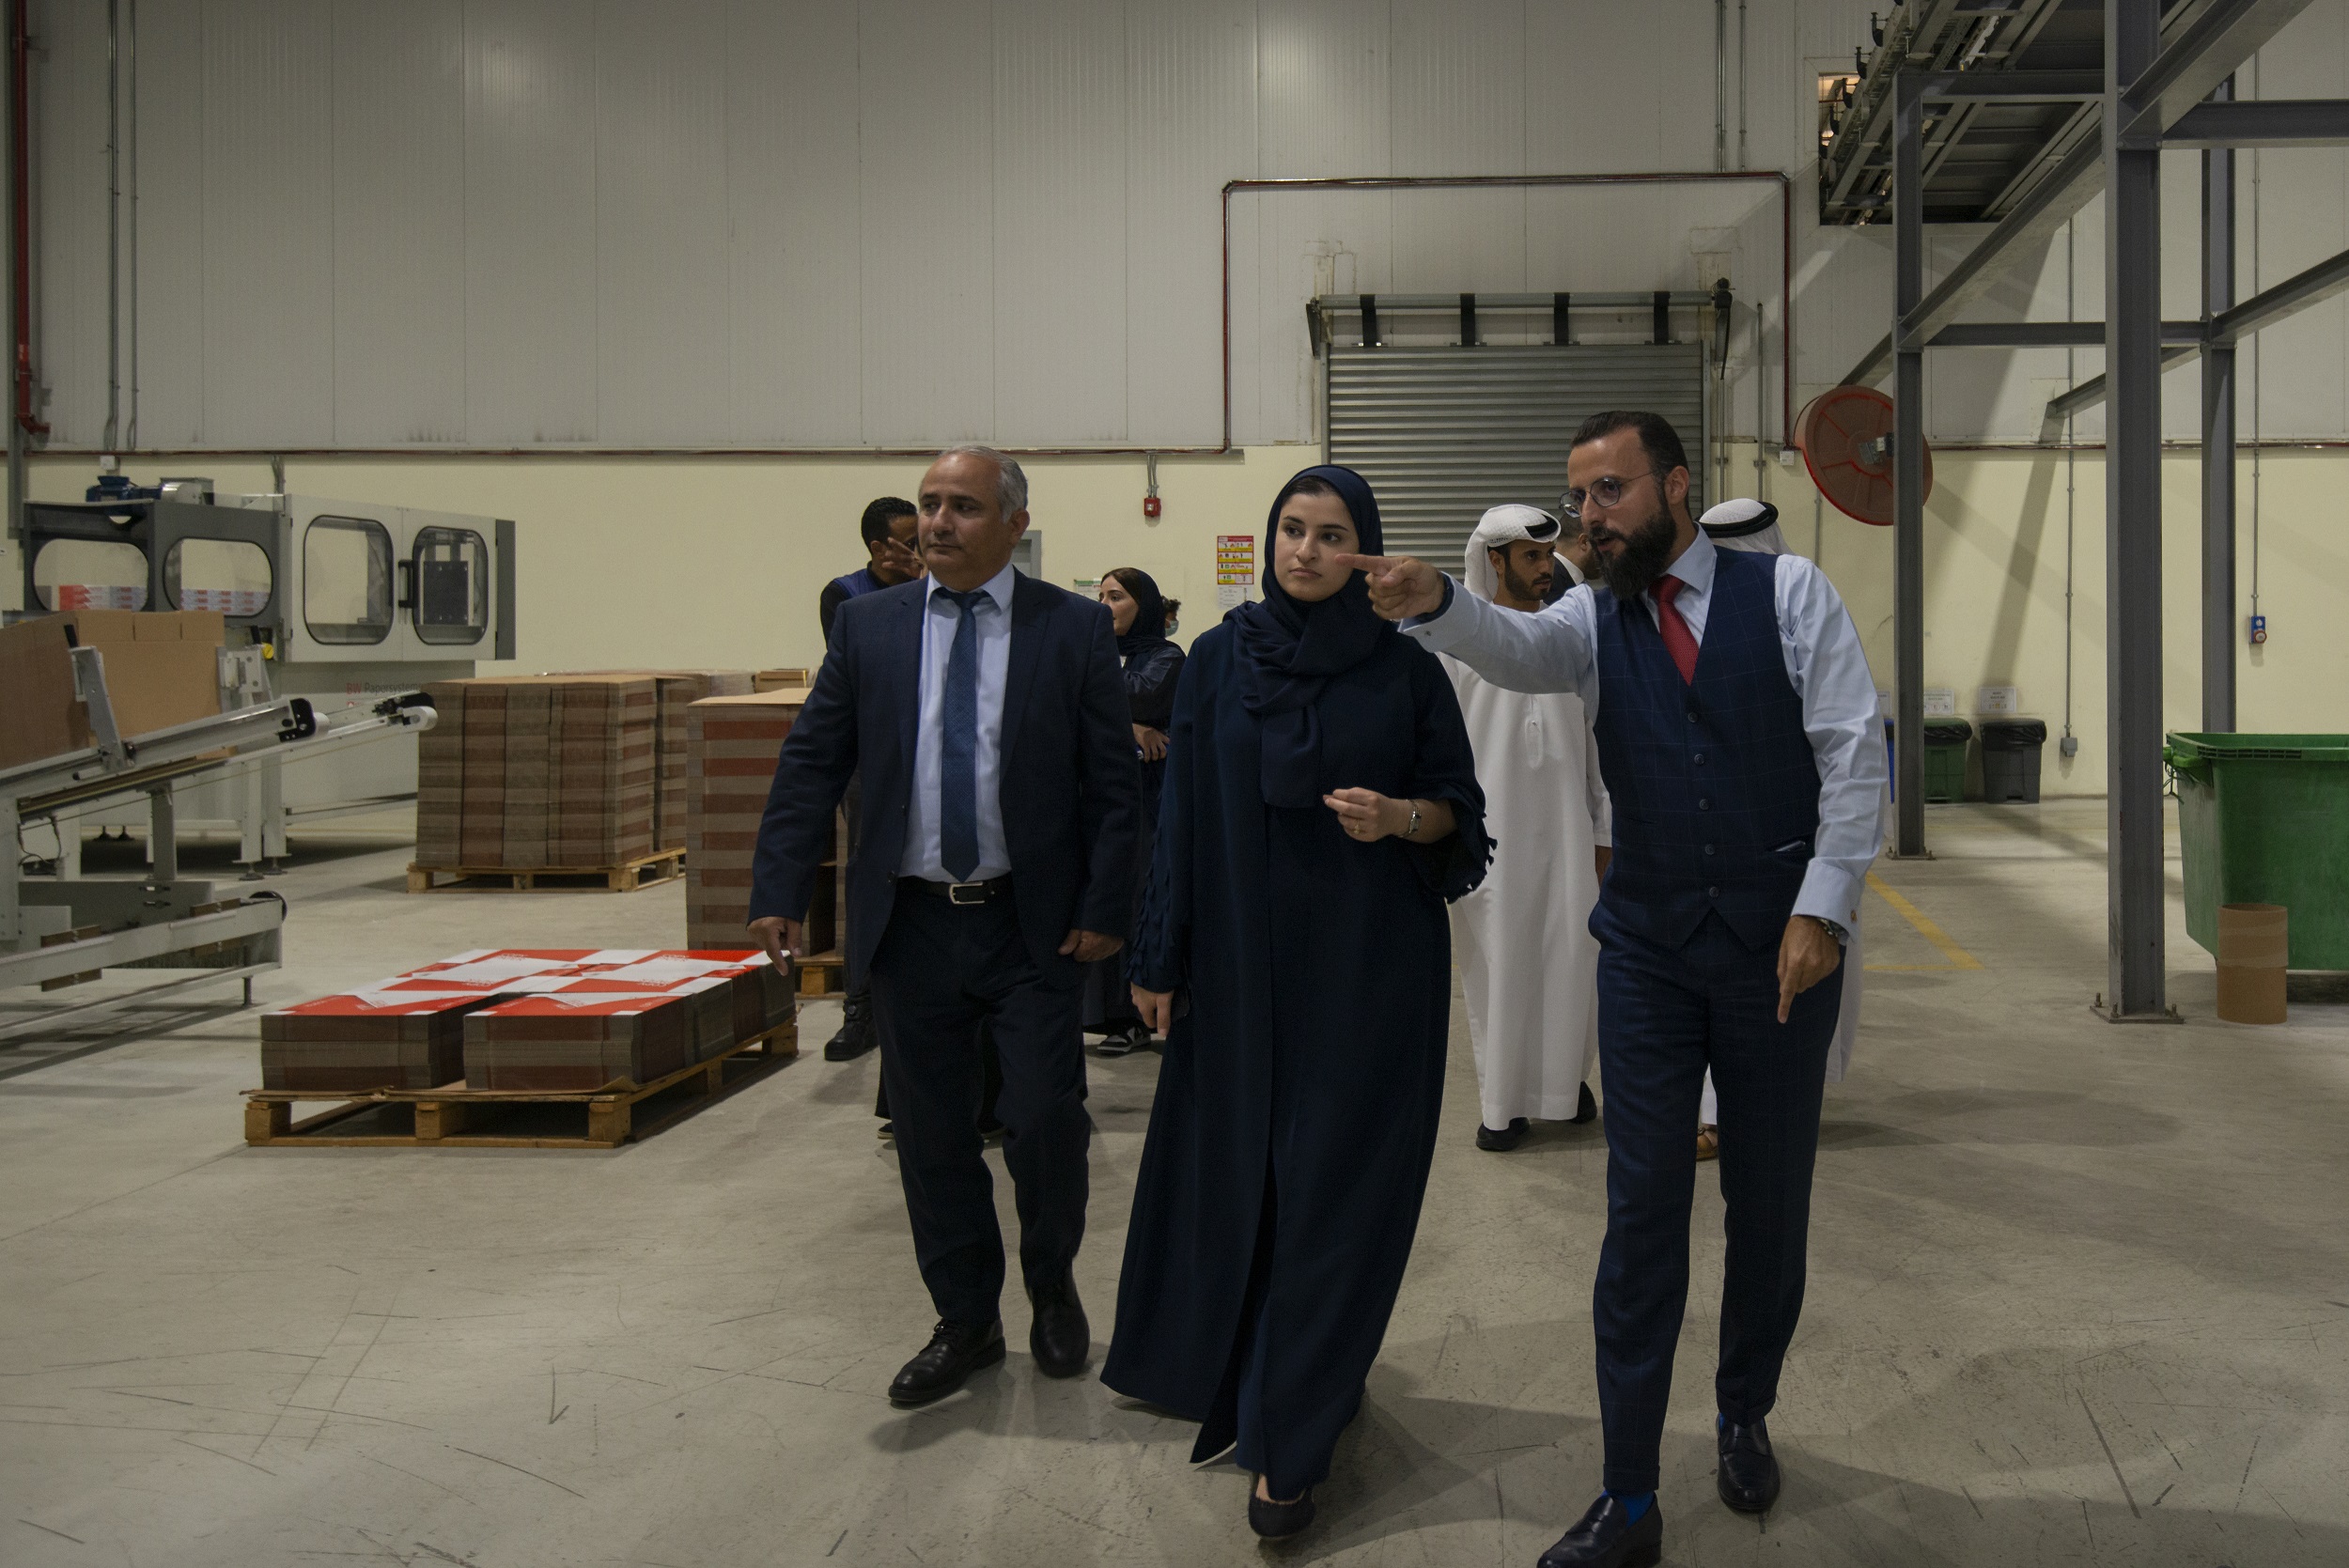 HE Sarah Al Amiri briefed on advanced technology projects at MENA’s largest paper plant